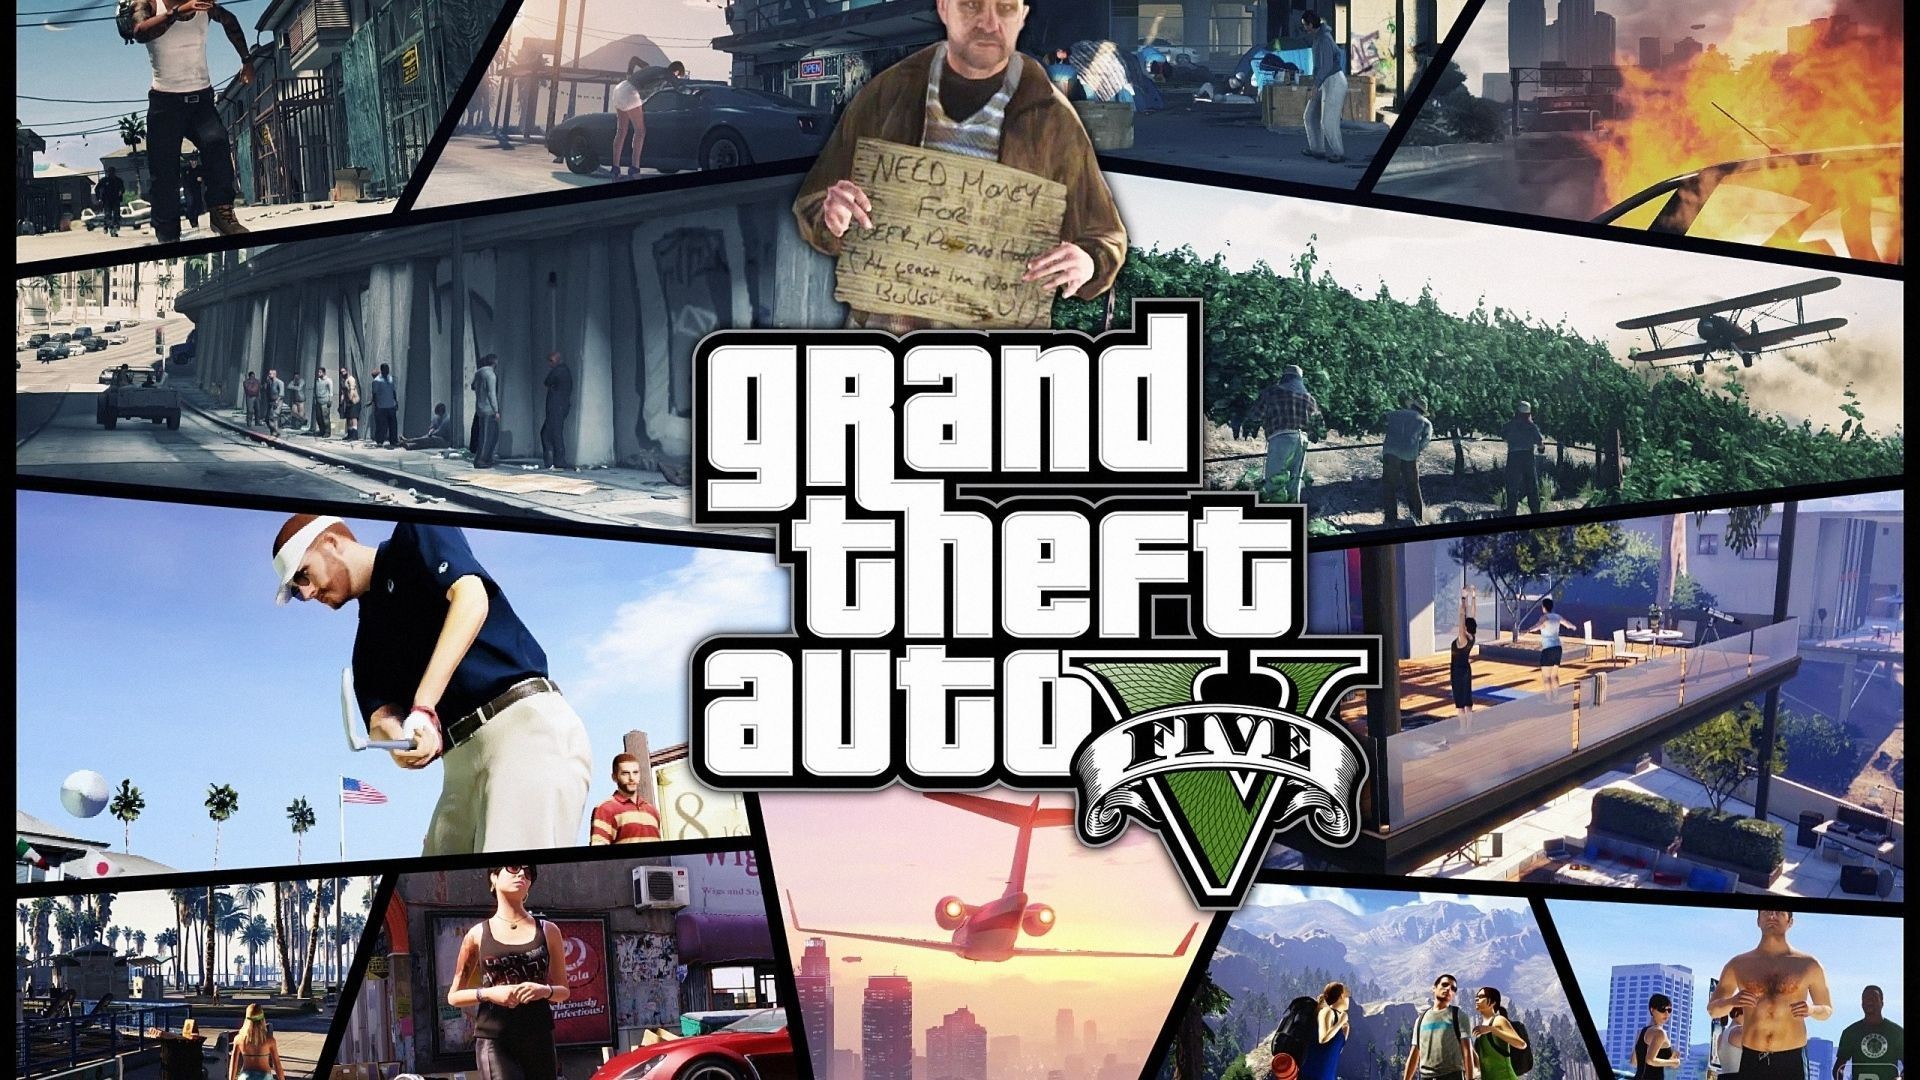 gta 5 wallpaper 1920x1080,product,pc game,games,font,photography